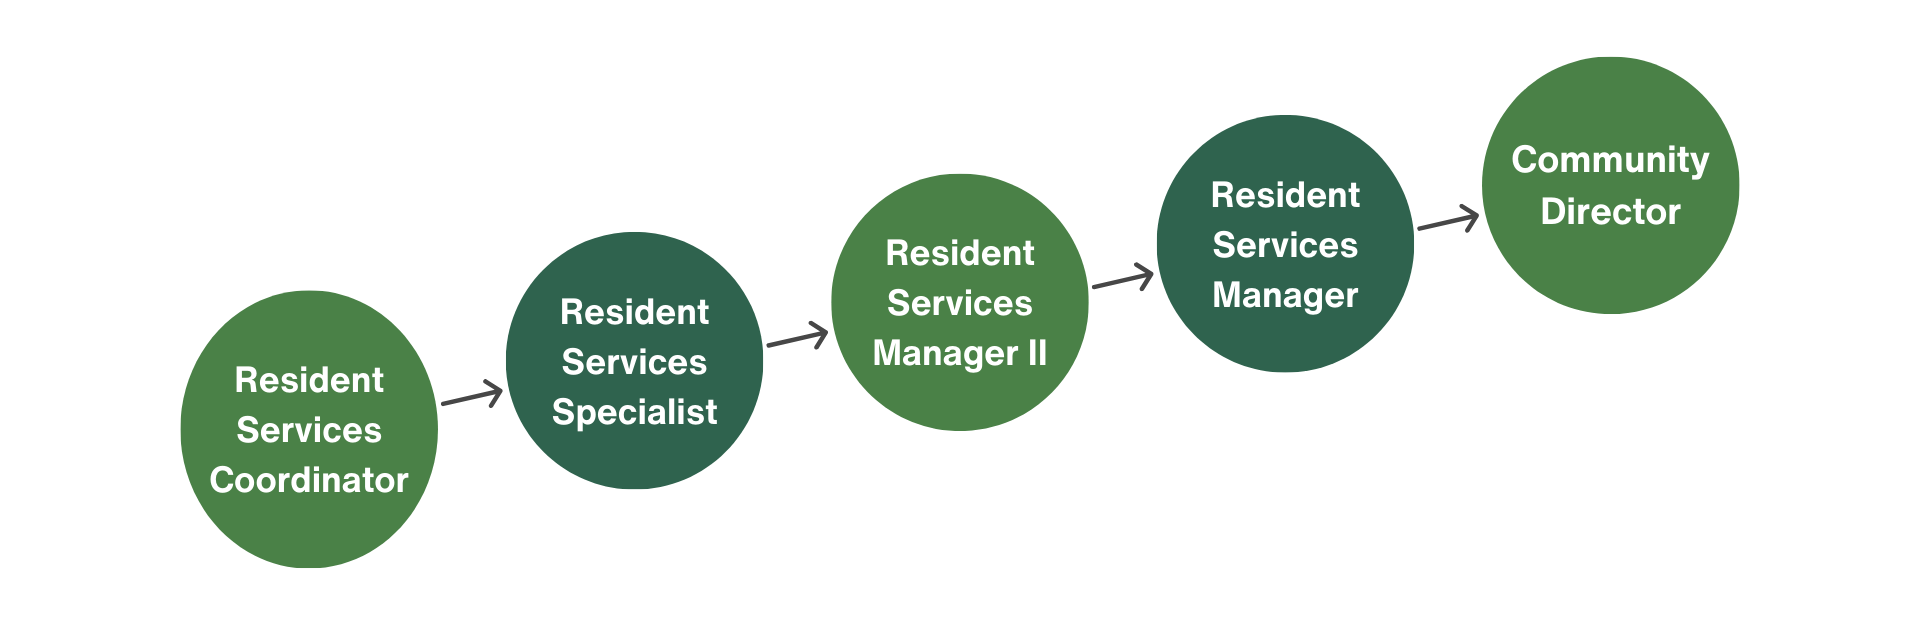 Resident Services Path: Resident Services Coordinator, Resident Services Specialist, Resident Services Manager II, Resident Services Manager, Community Director